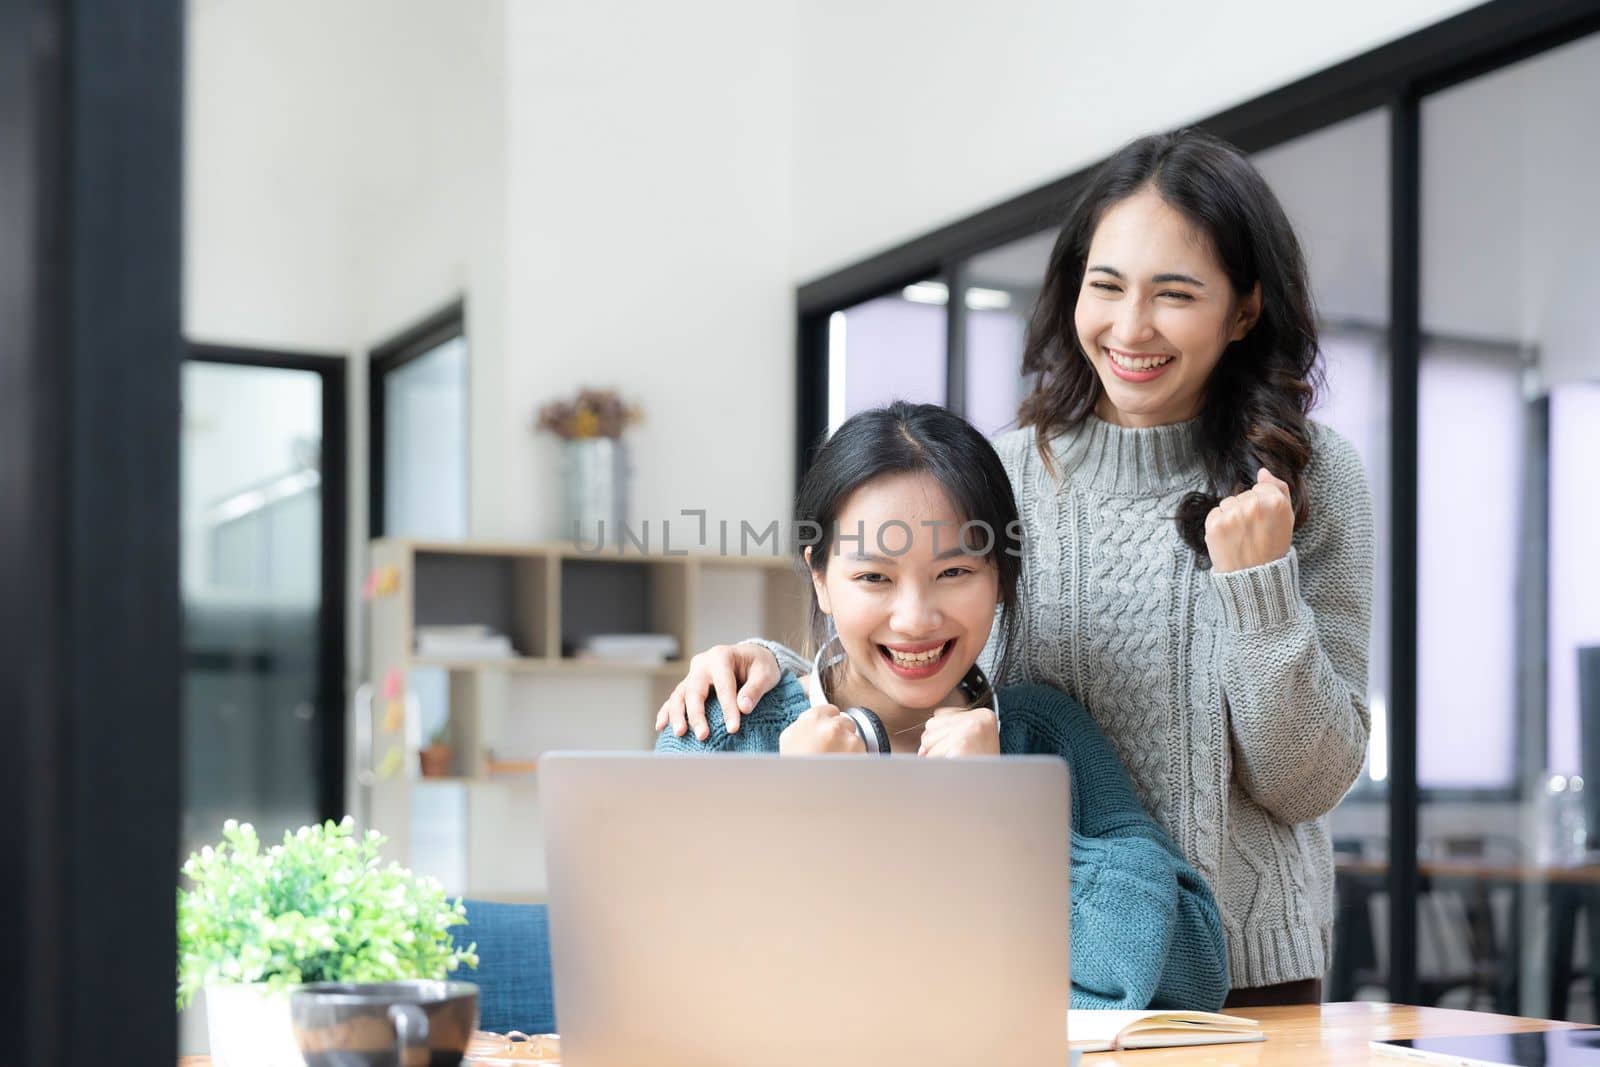 Two young Asian women show joyful expression of success at work smiling happily with a laptop computer in a modern office...